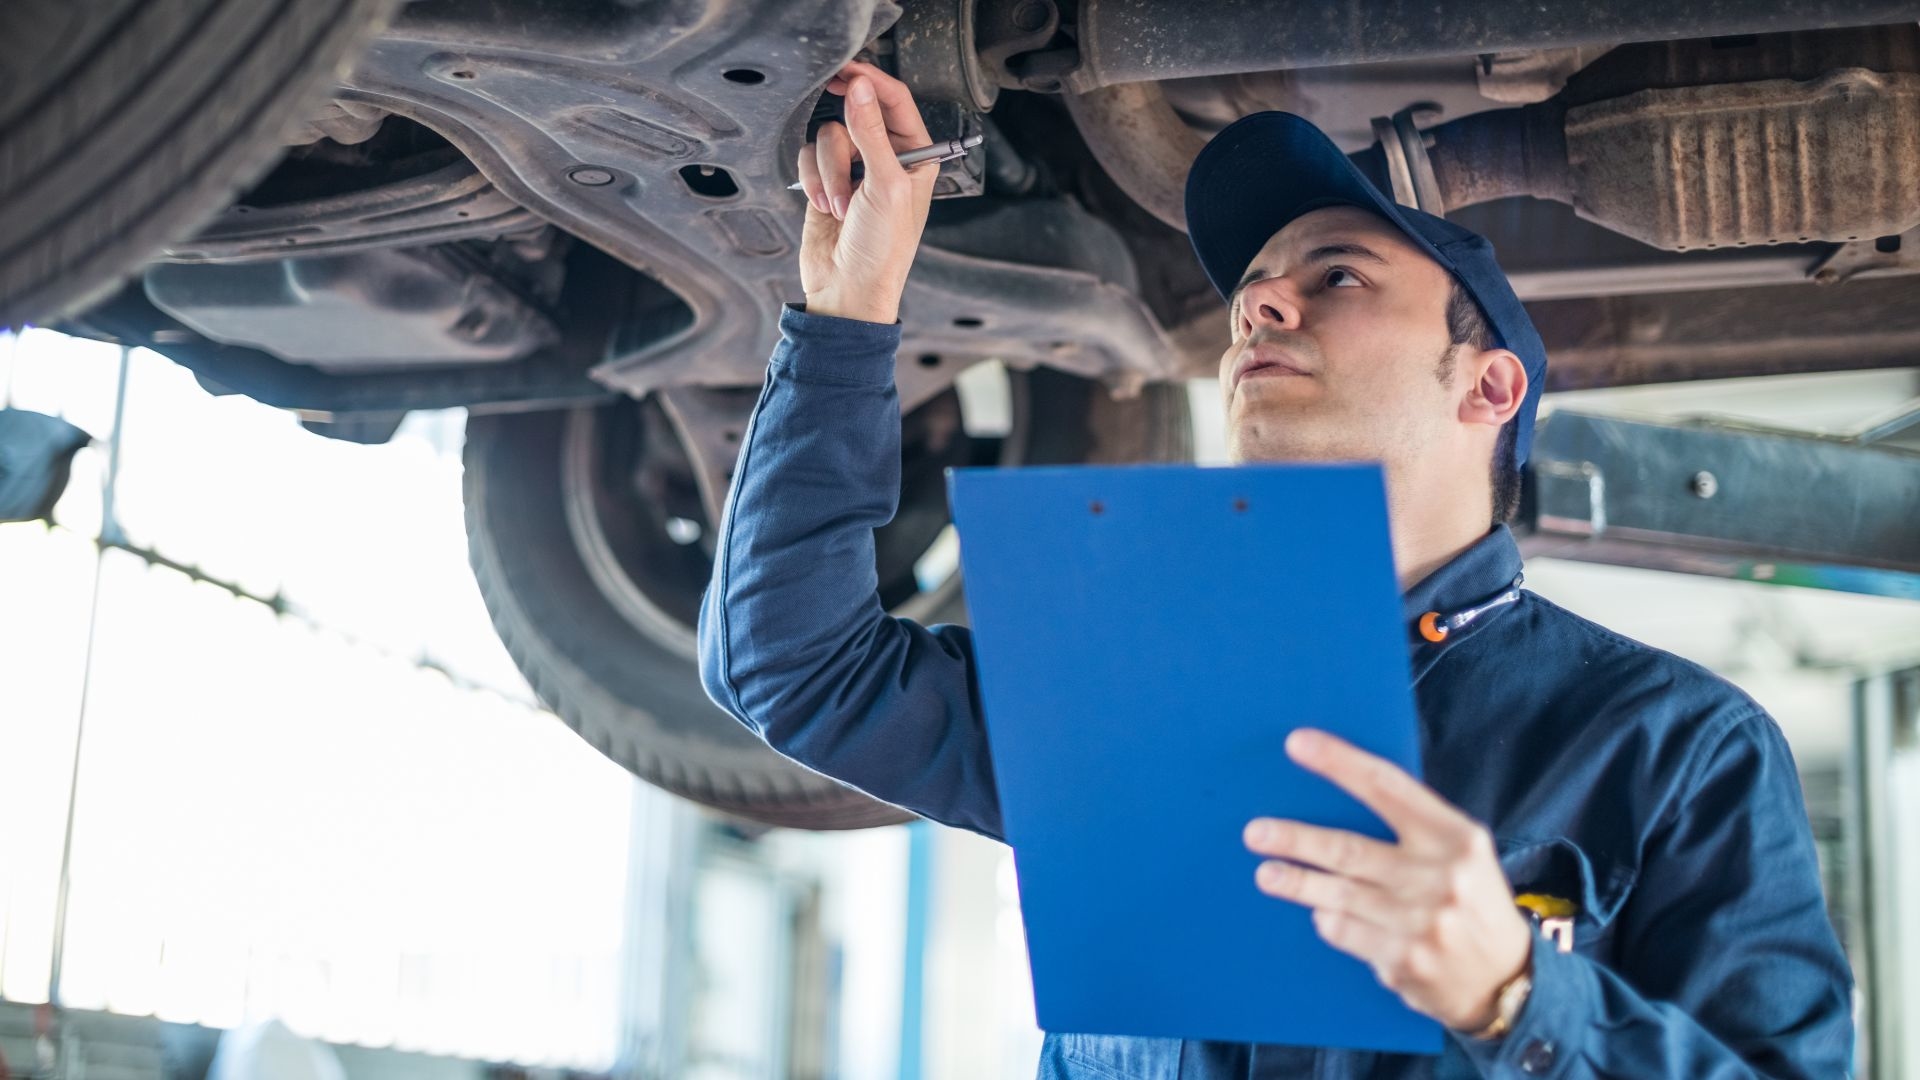 what is checked in a car mot test?